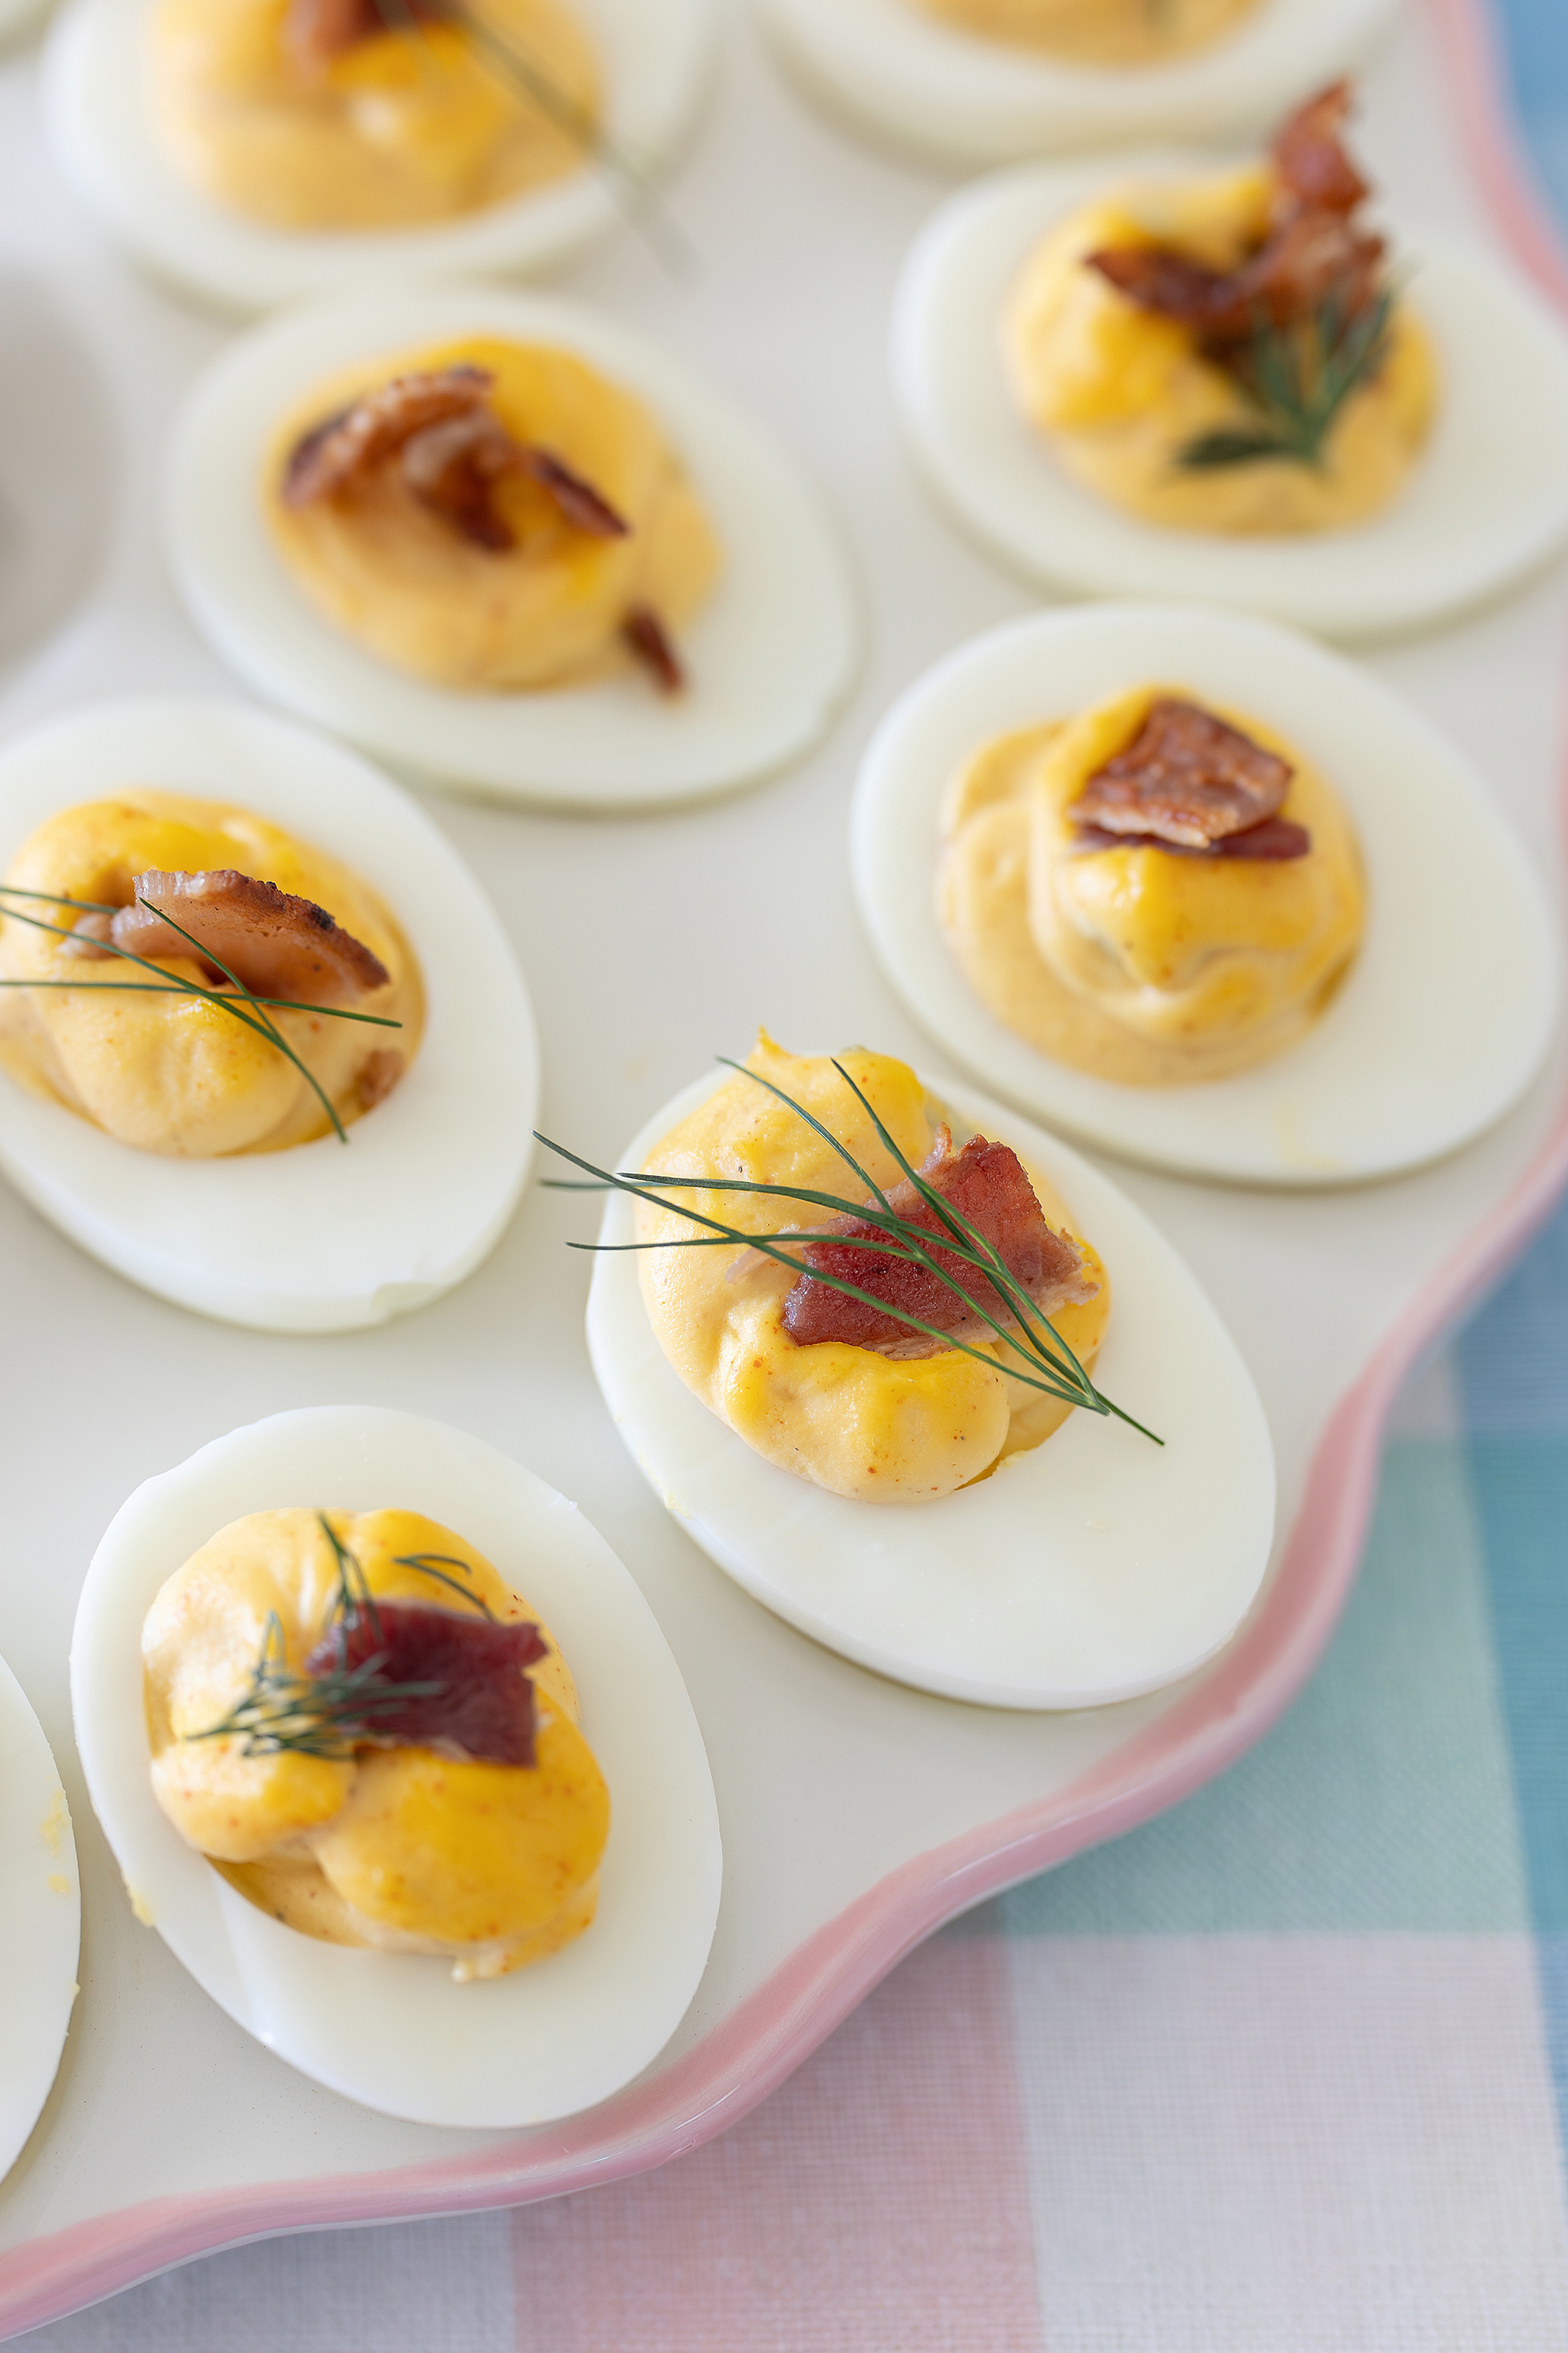 Deviled eggs on a pastel plate.